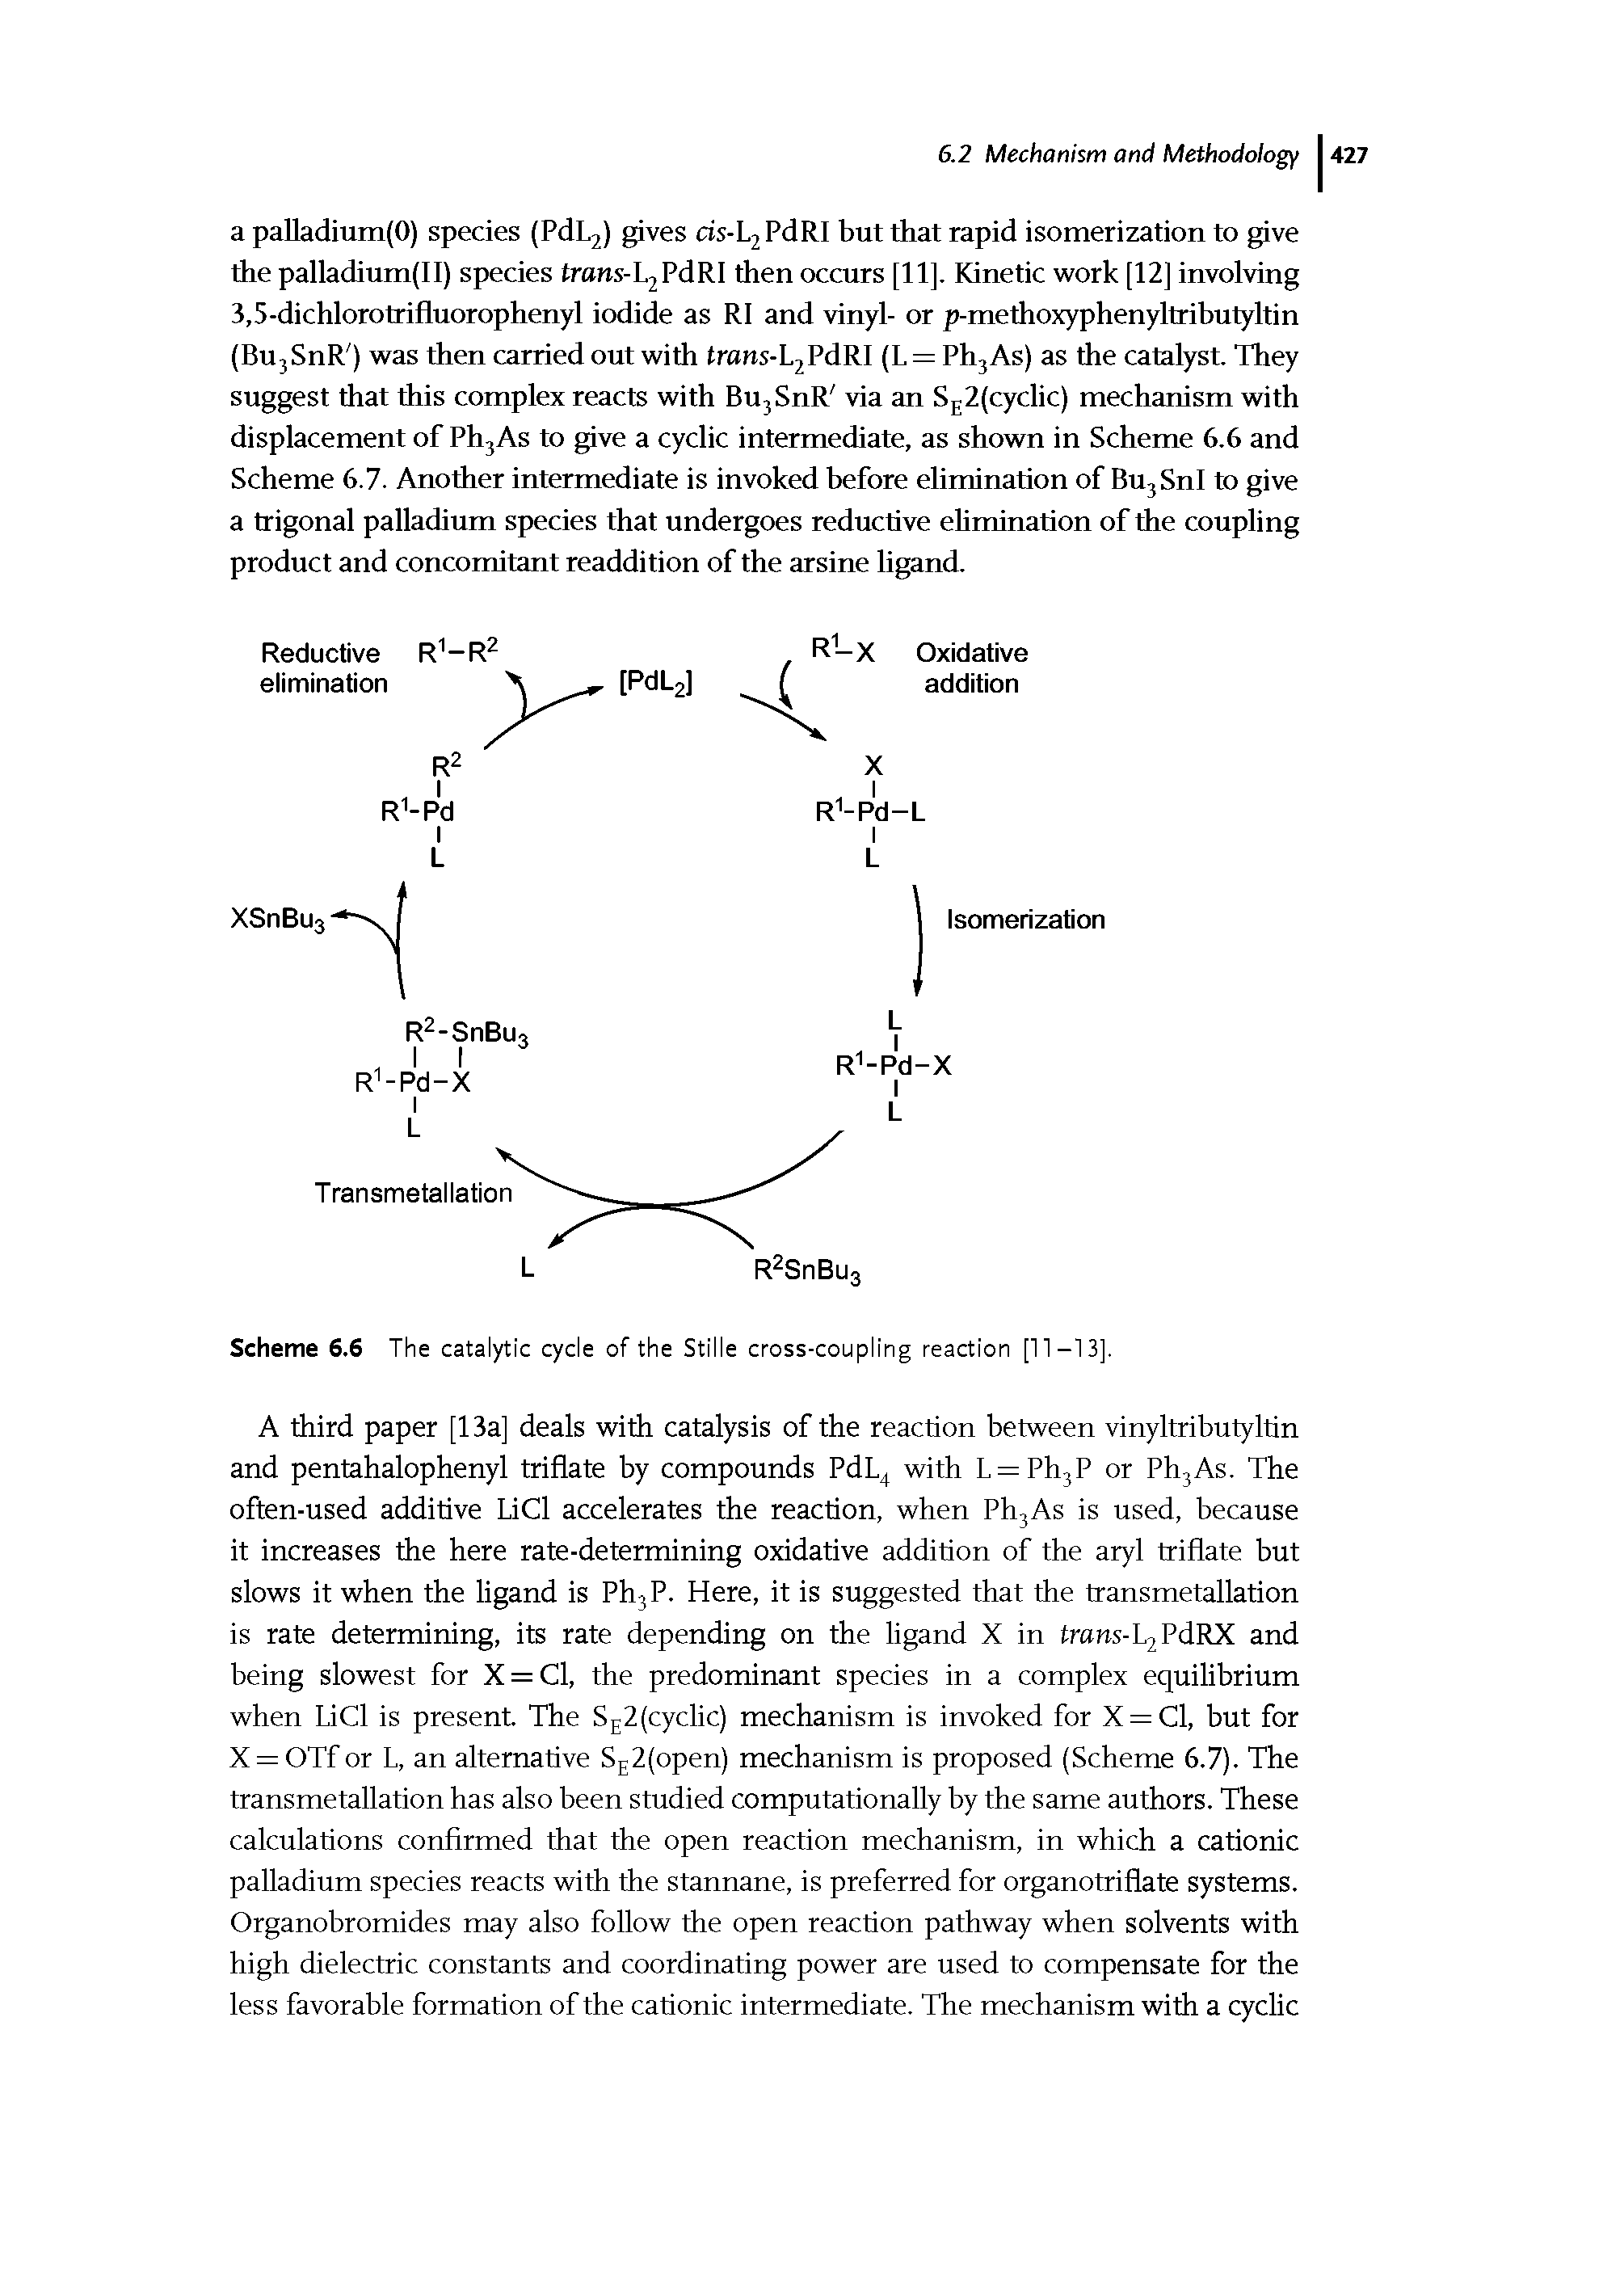 Scheme 6.6 The catalytic cycle of the Stille cross-coupling reaction [11-13].